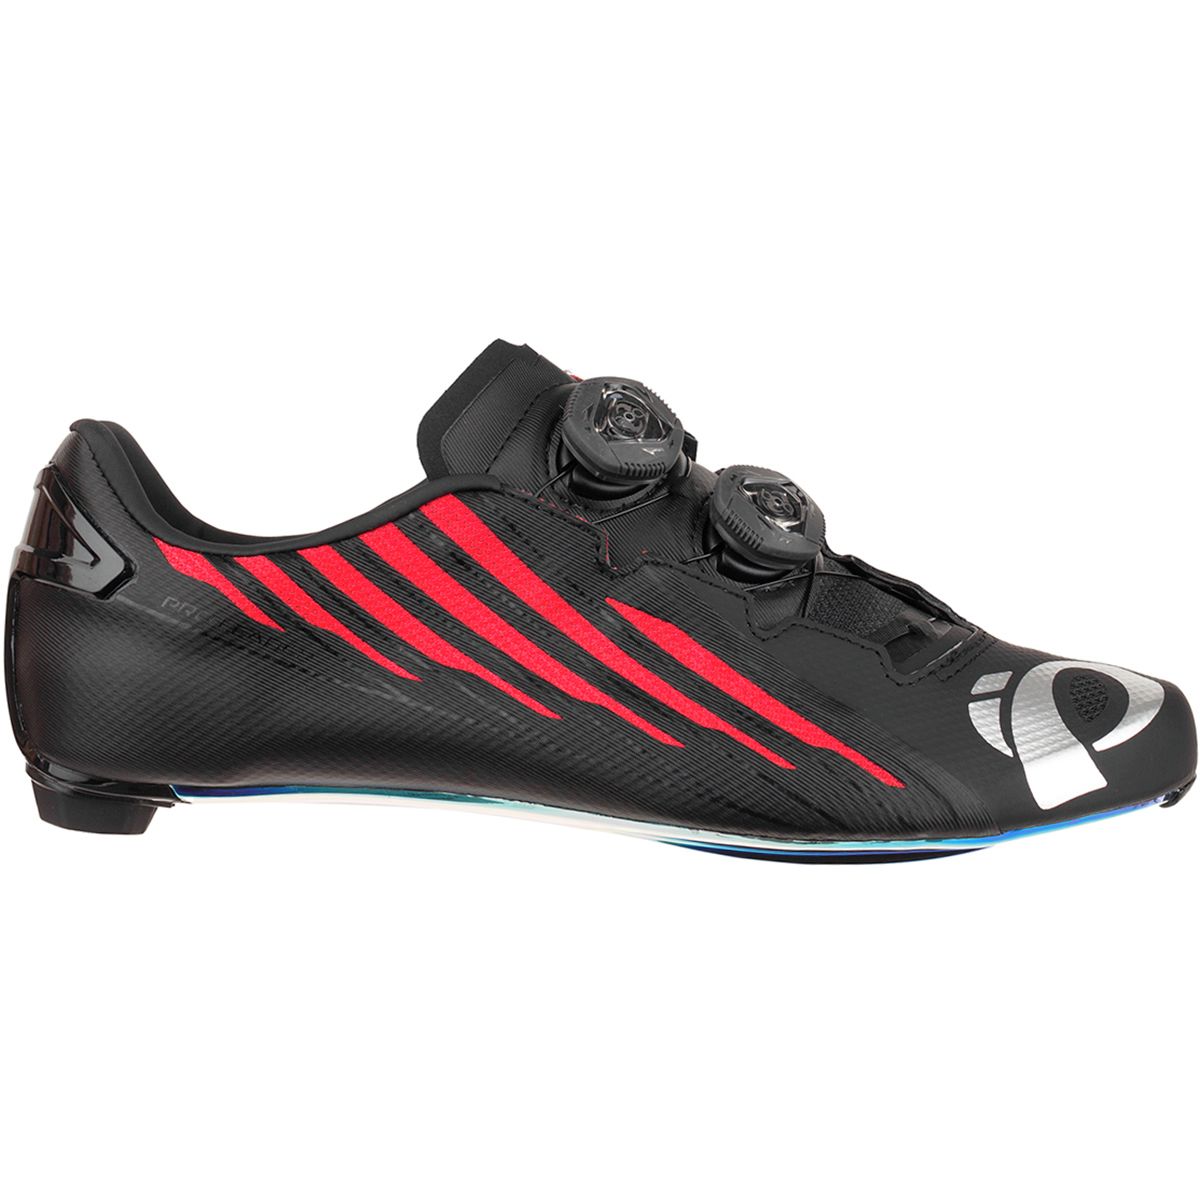 Pearl Izumi Pro Leader V4 Limited Edition Cycling Shoe - Men's